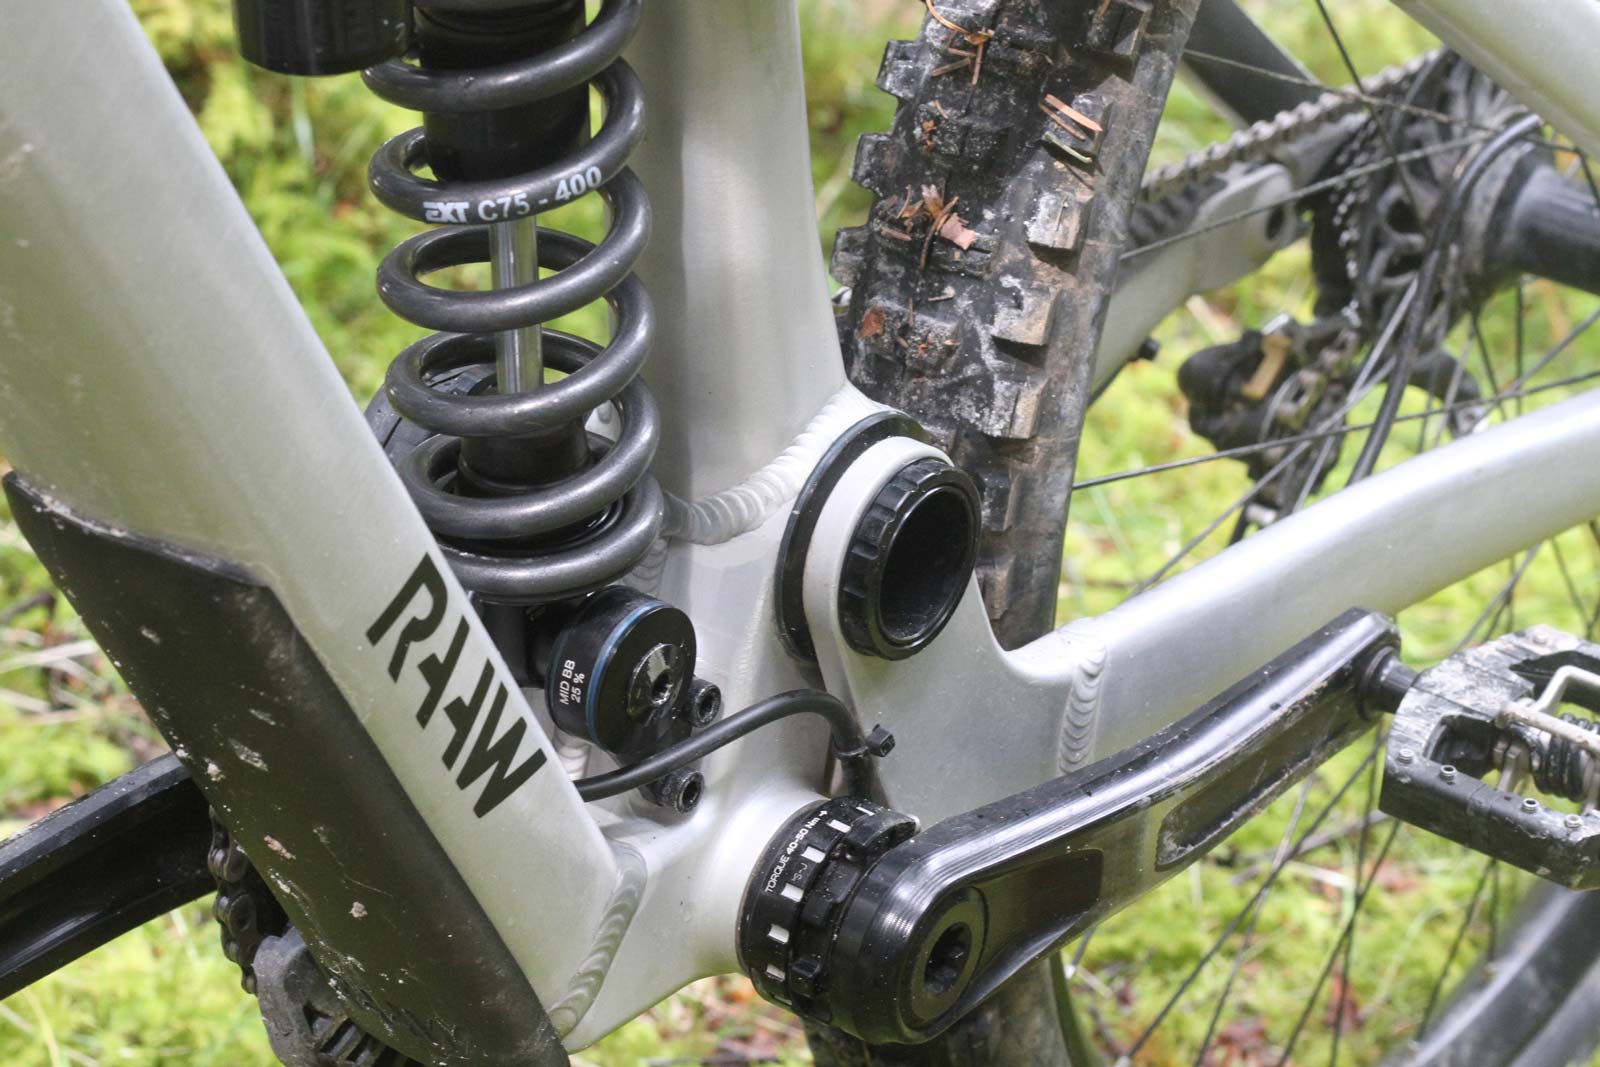 raaw dh mtb prototype kj sharp's race rig fort william world cup non0-drive side main pivot bearing